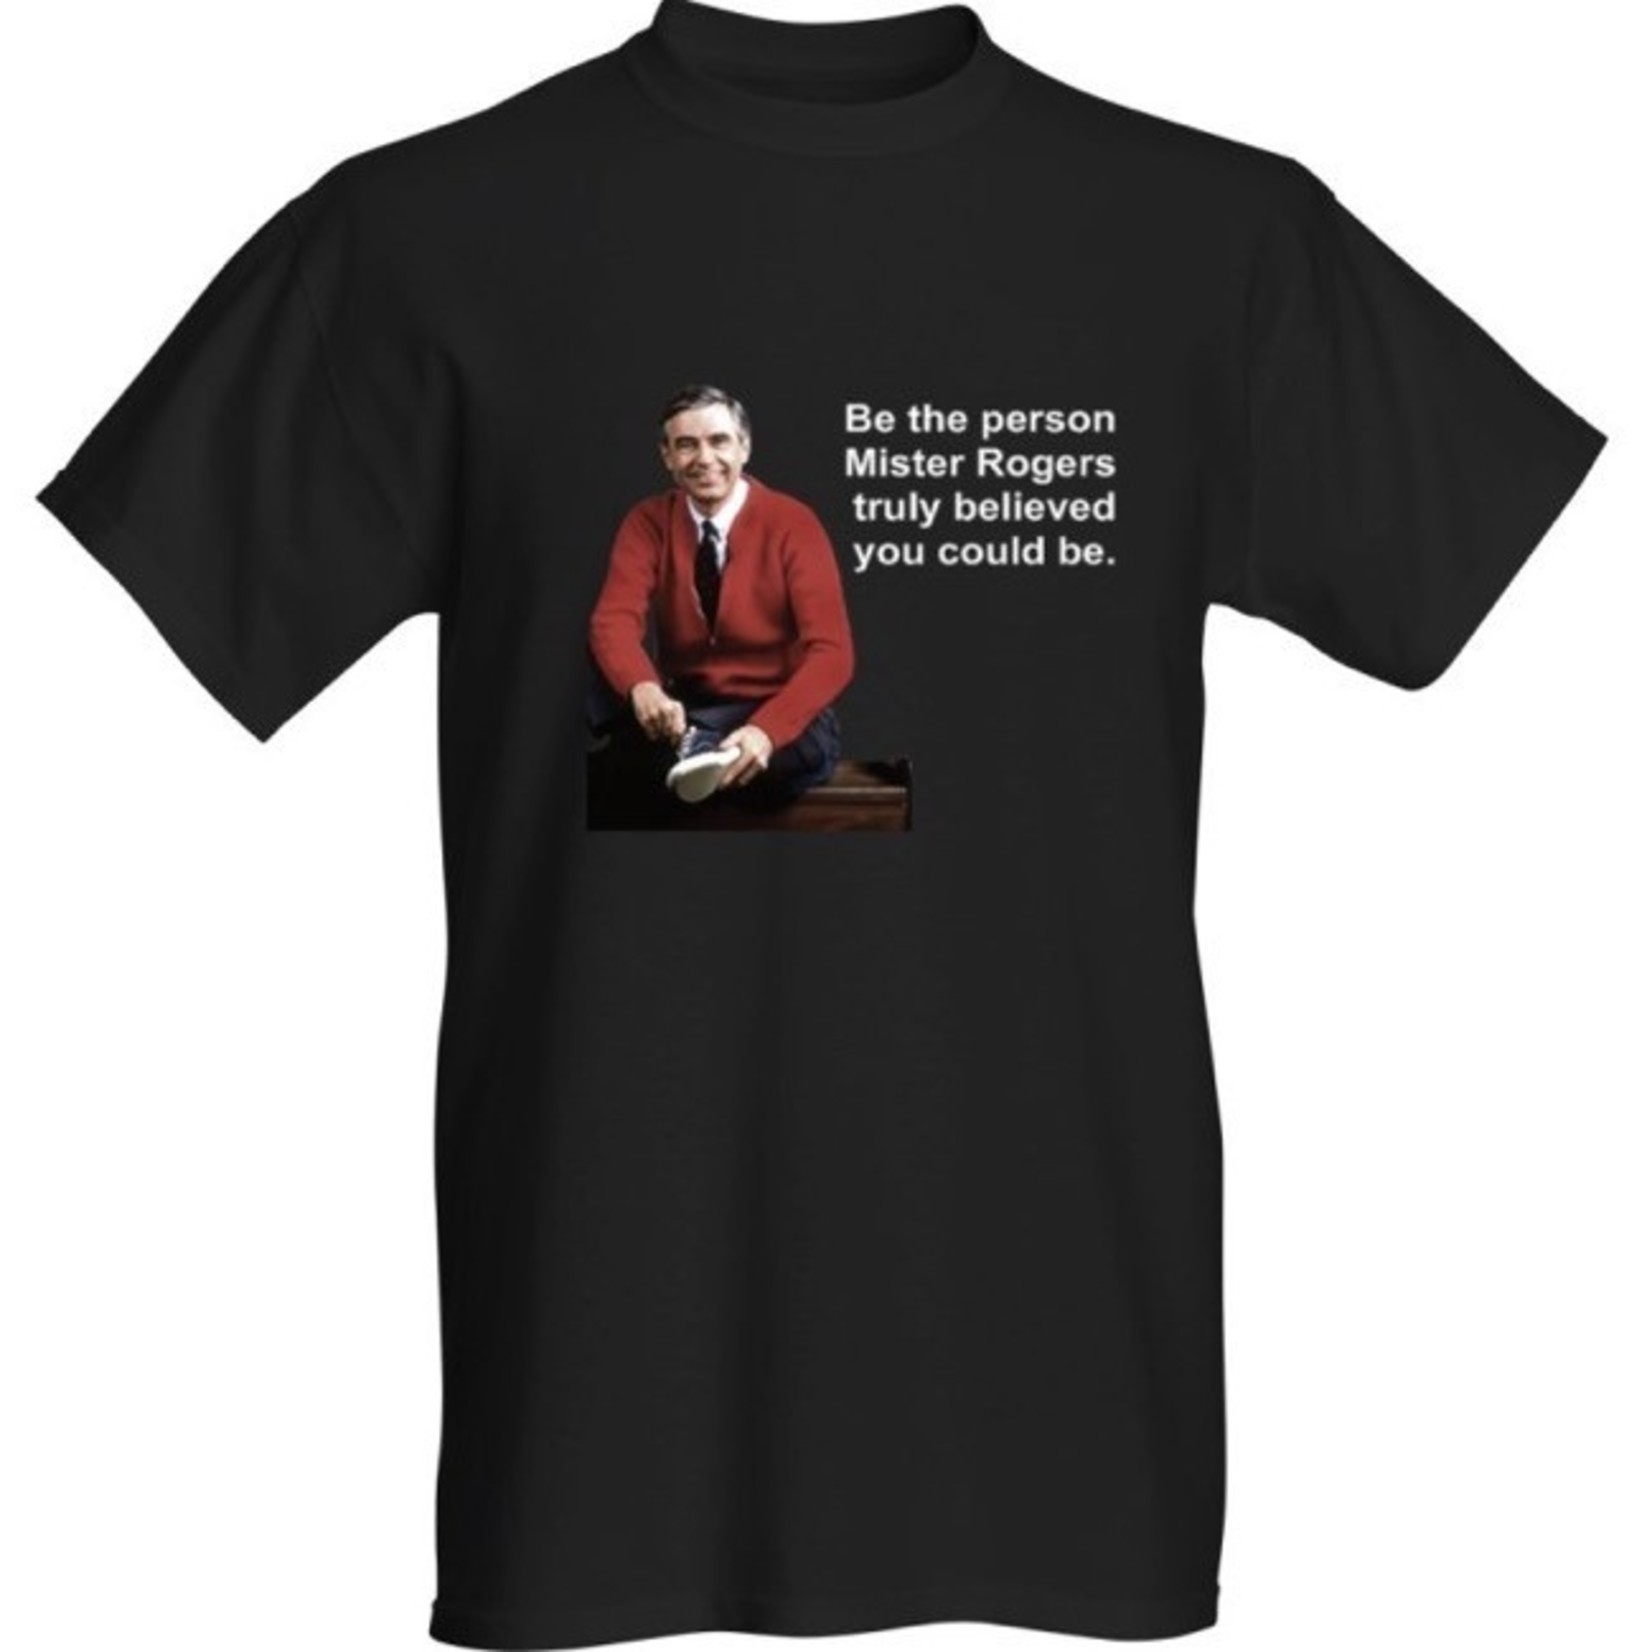 Bad Annie’s T-Shirt - Mister Rogers Believe